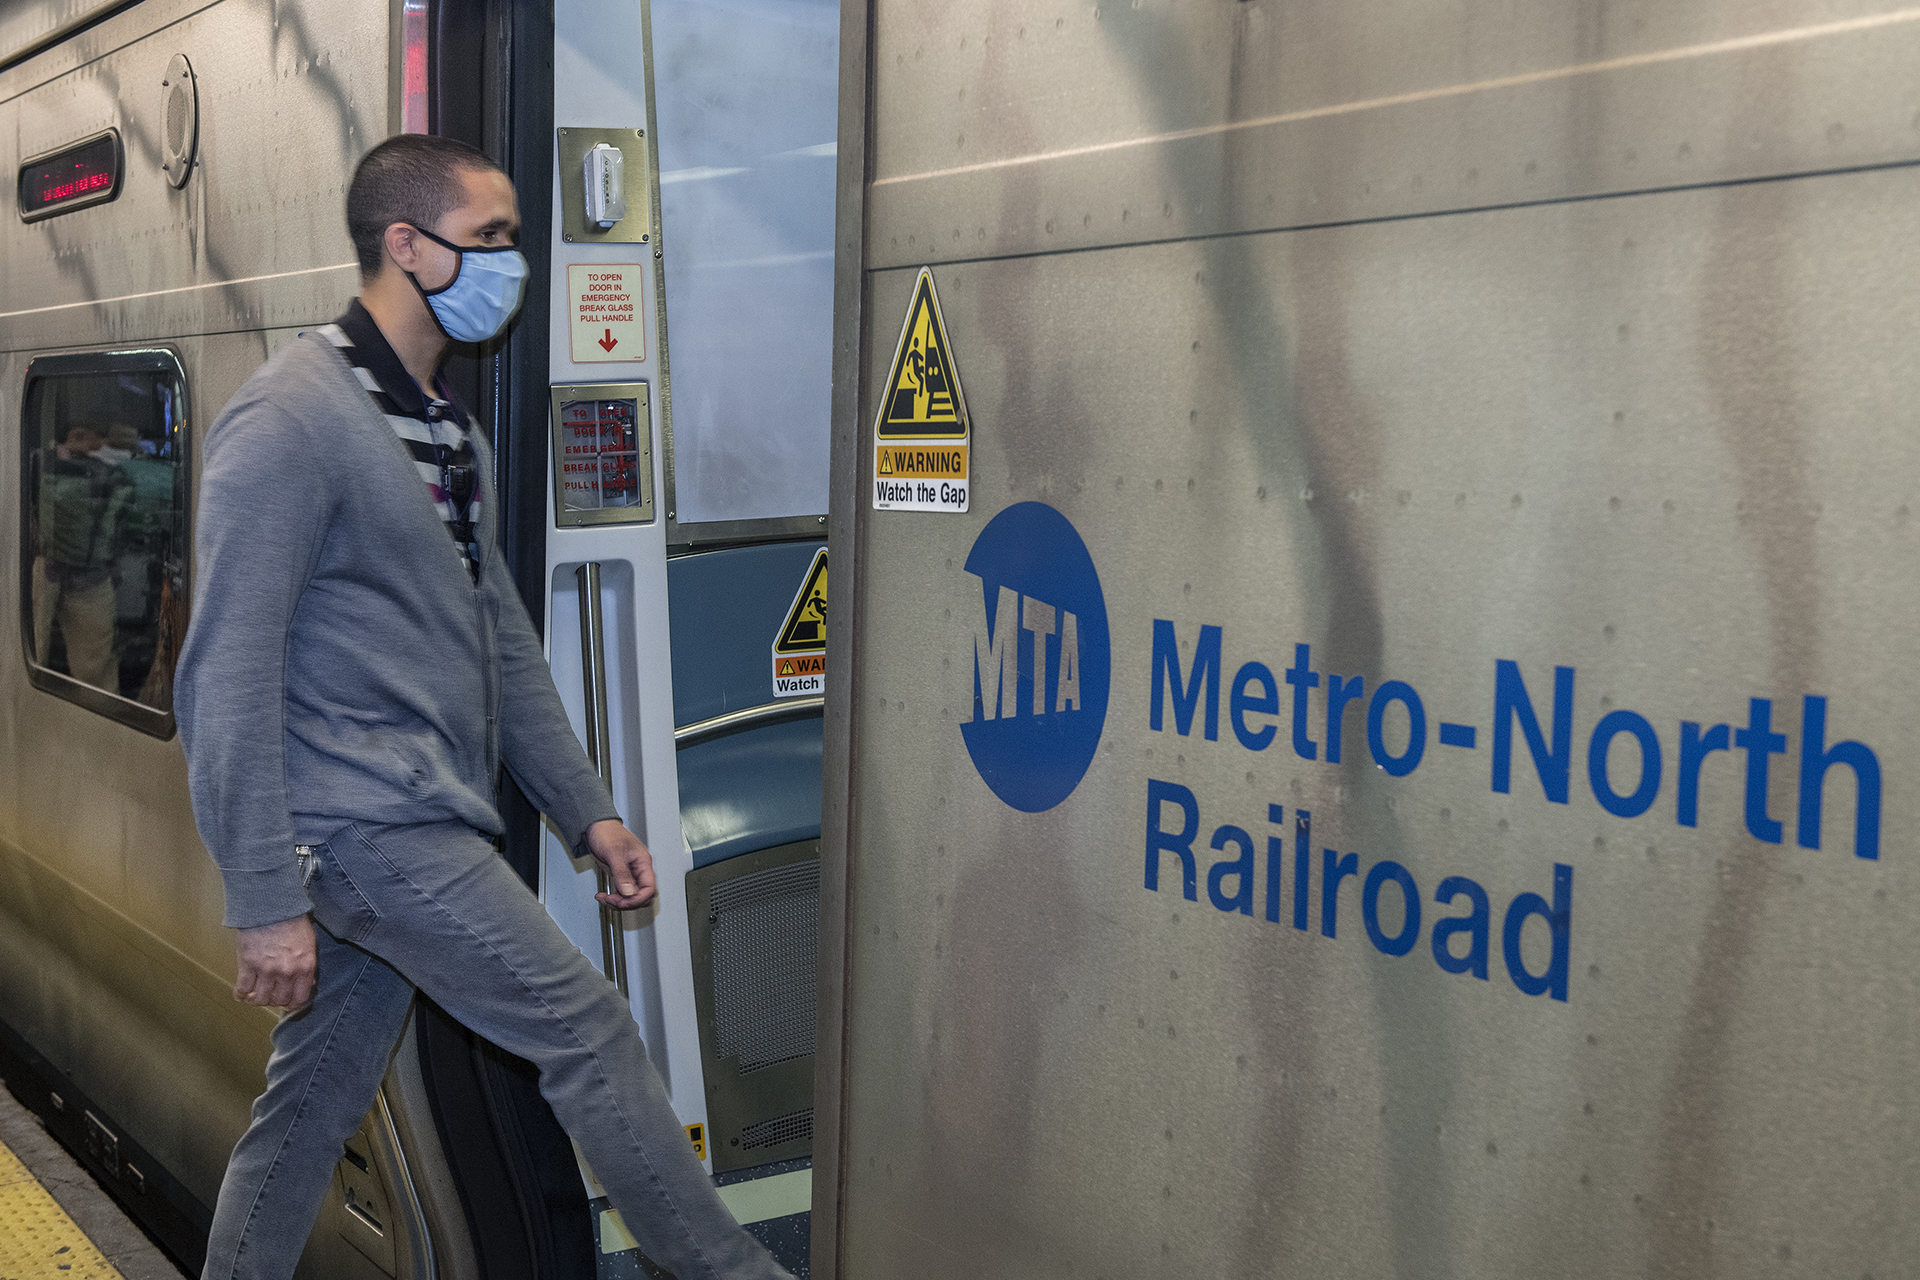 Metro-North Announces New Haven Line Schedule Adjustments Effective Monday, May 17, to Accommodate Temporary Track Work 